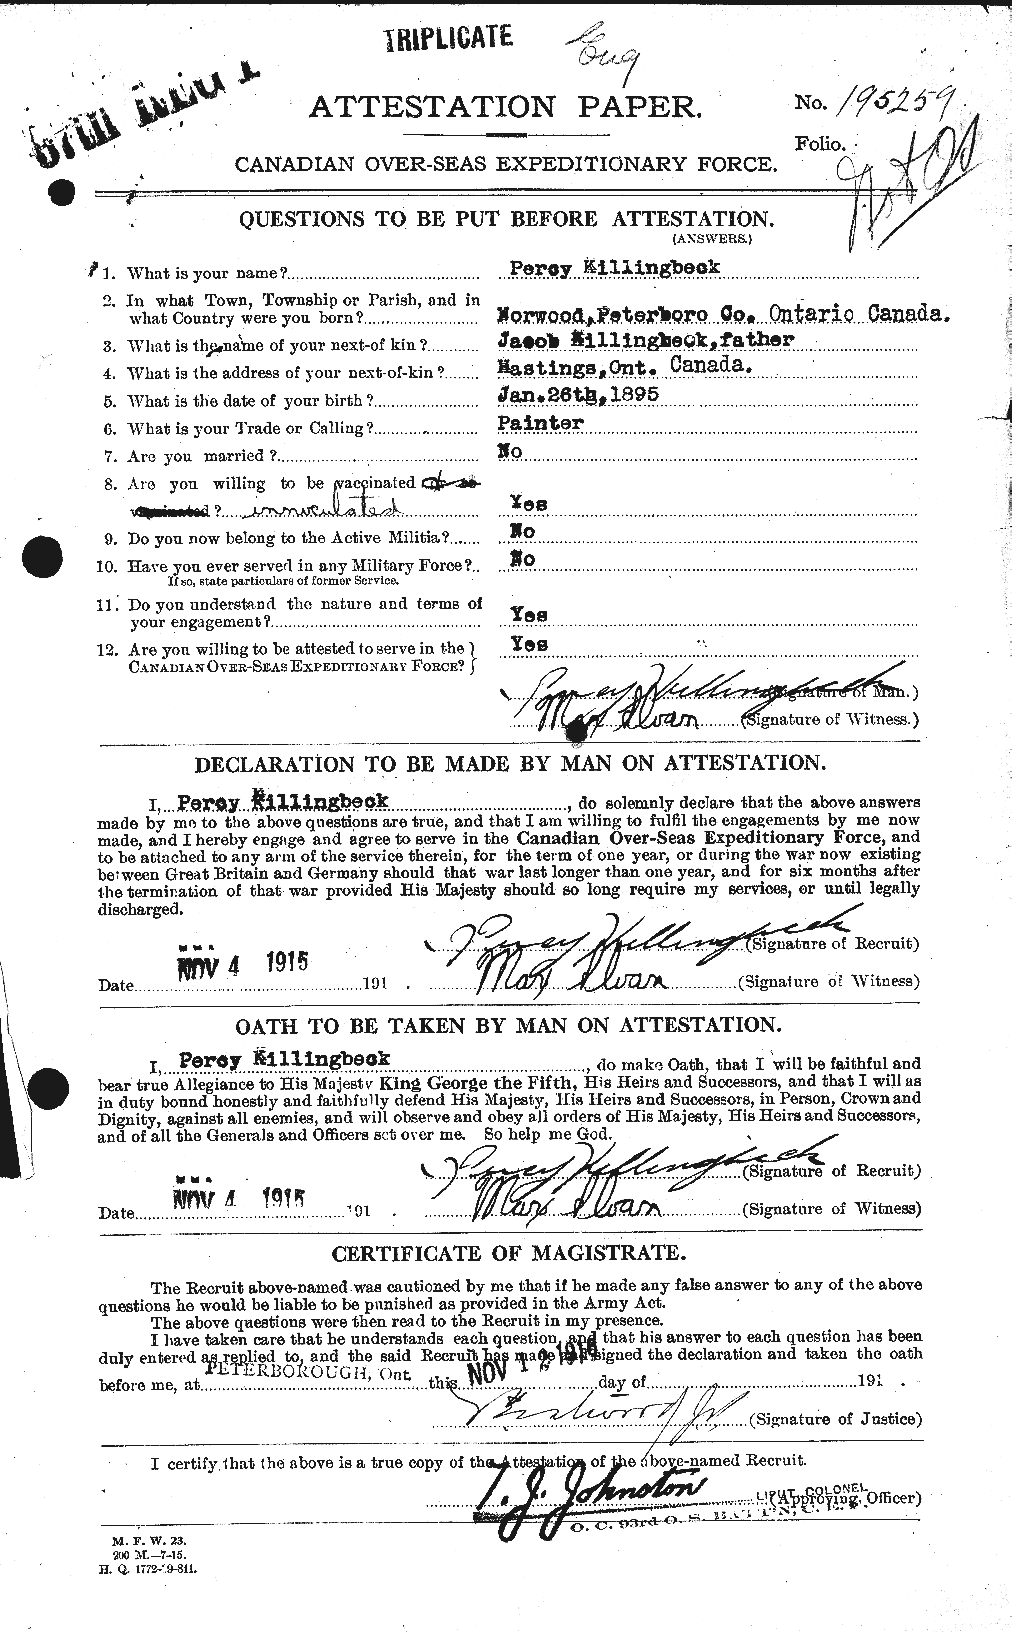 Personnel Records of the First World War - CEF 434079a